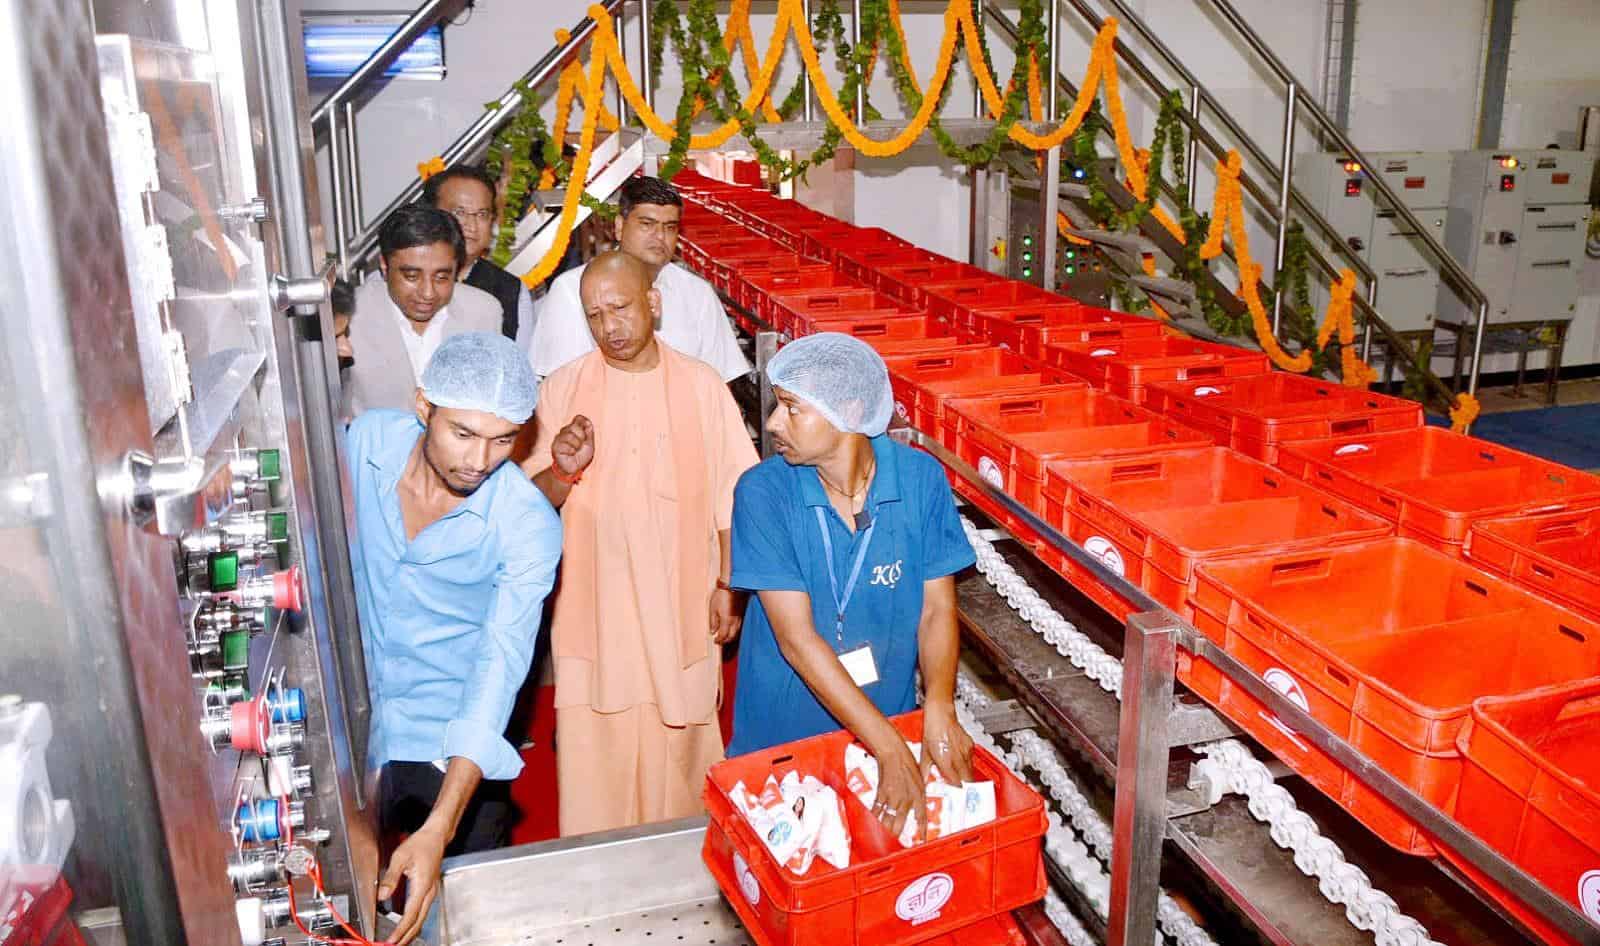 Inauguration of Milk and Milk Products Project of Gyan Dairy in Gorakhpur